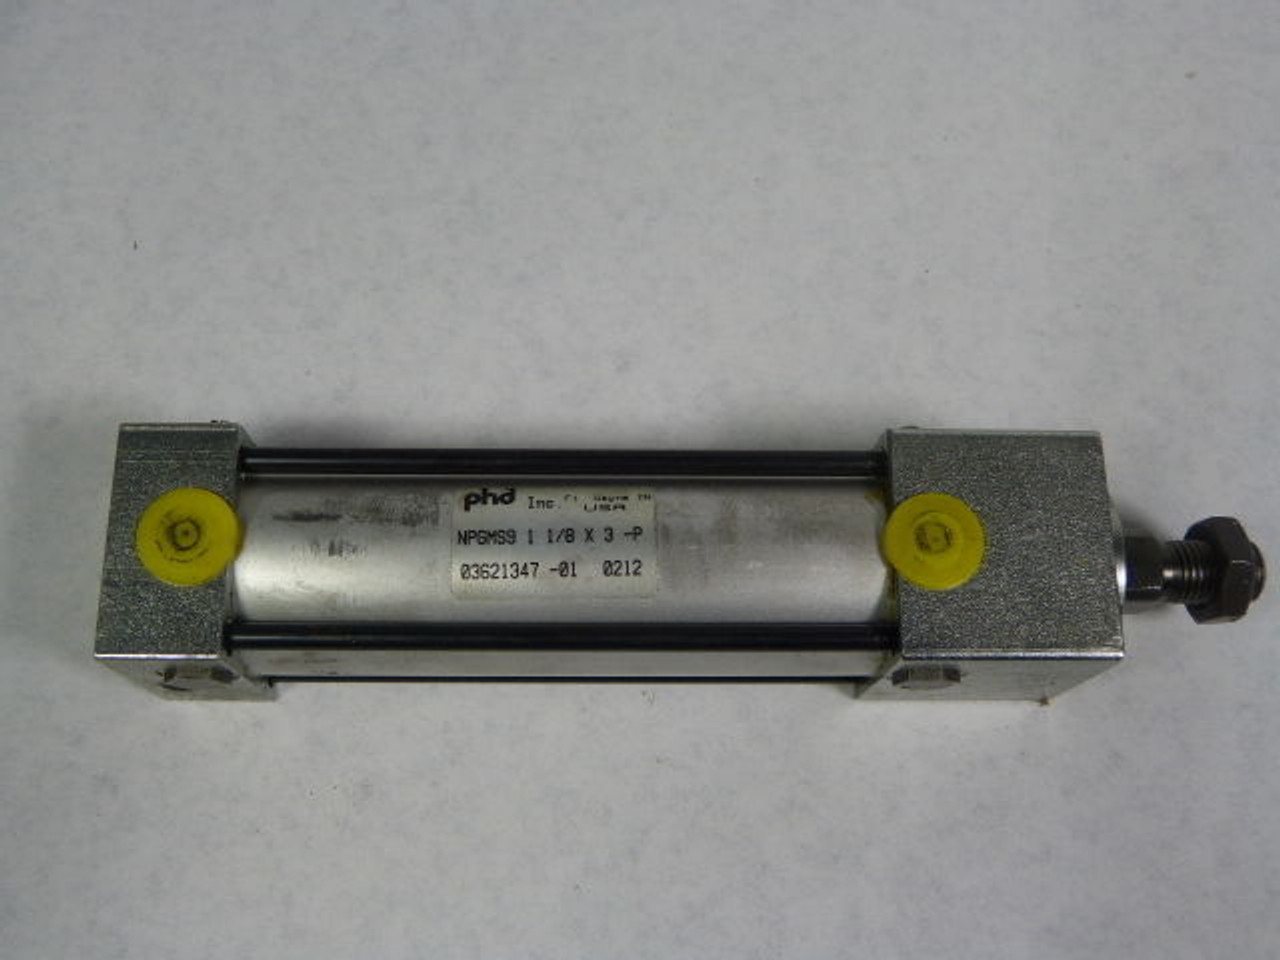 Phd NPGMS9-11/8X3-P Pneumatic Cylinder 1-1/8" Bore 3" Stroke USED